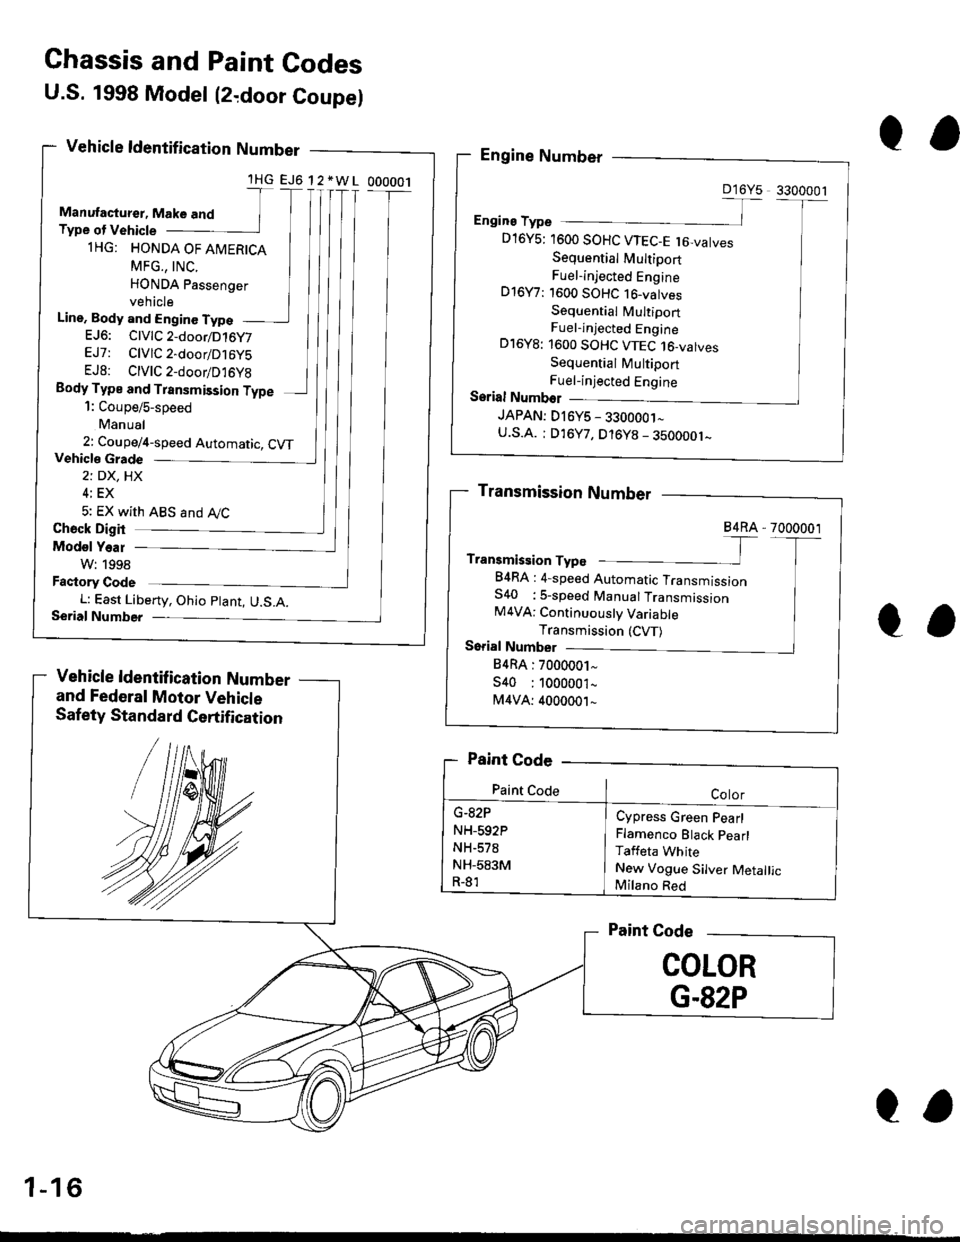 HONDA CIVIC 1996 6.G Workshop Manual Ghassis and Paint Codes
U.S. 1998 Model (2,door Coupel
Vehicle ldentif ication Number
and Federal Motor Vehicle
Safety Standard Certification
lHG EJ6 12*WL 000001
Line, Body and Enginc TypeEJ6: ClVlC2